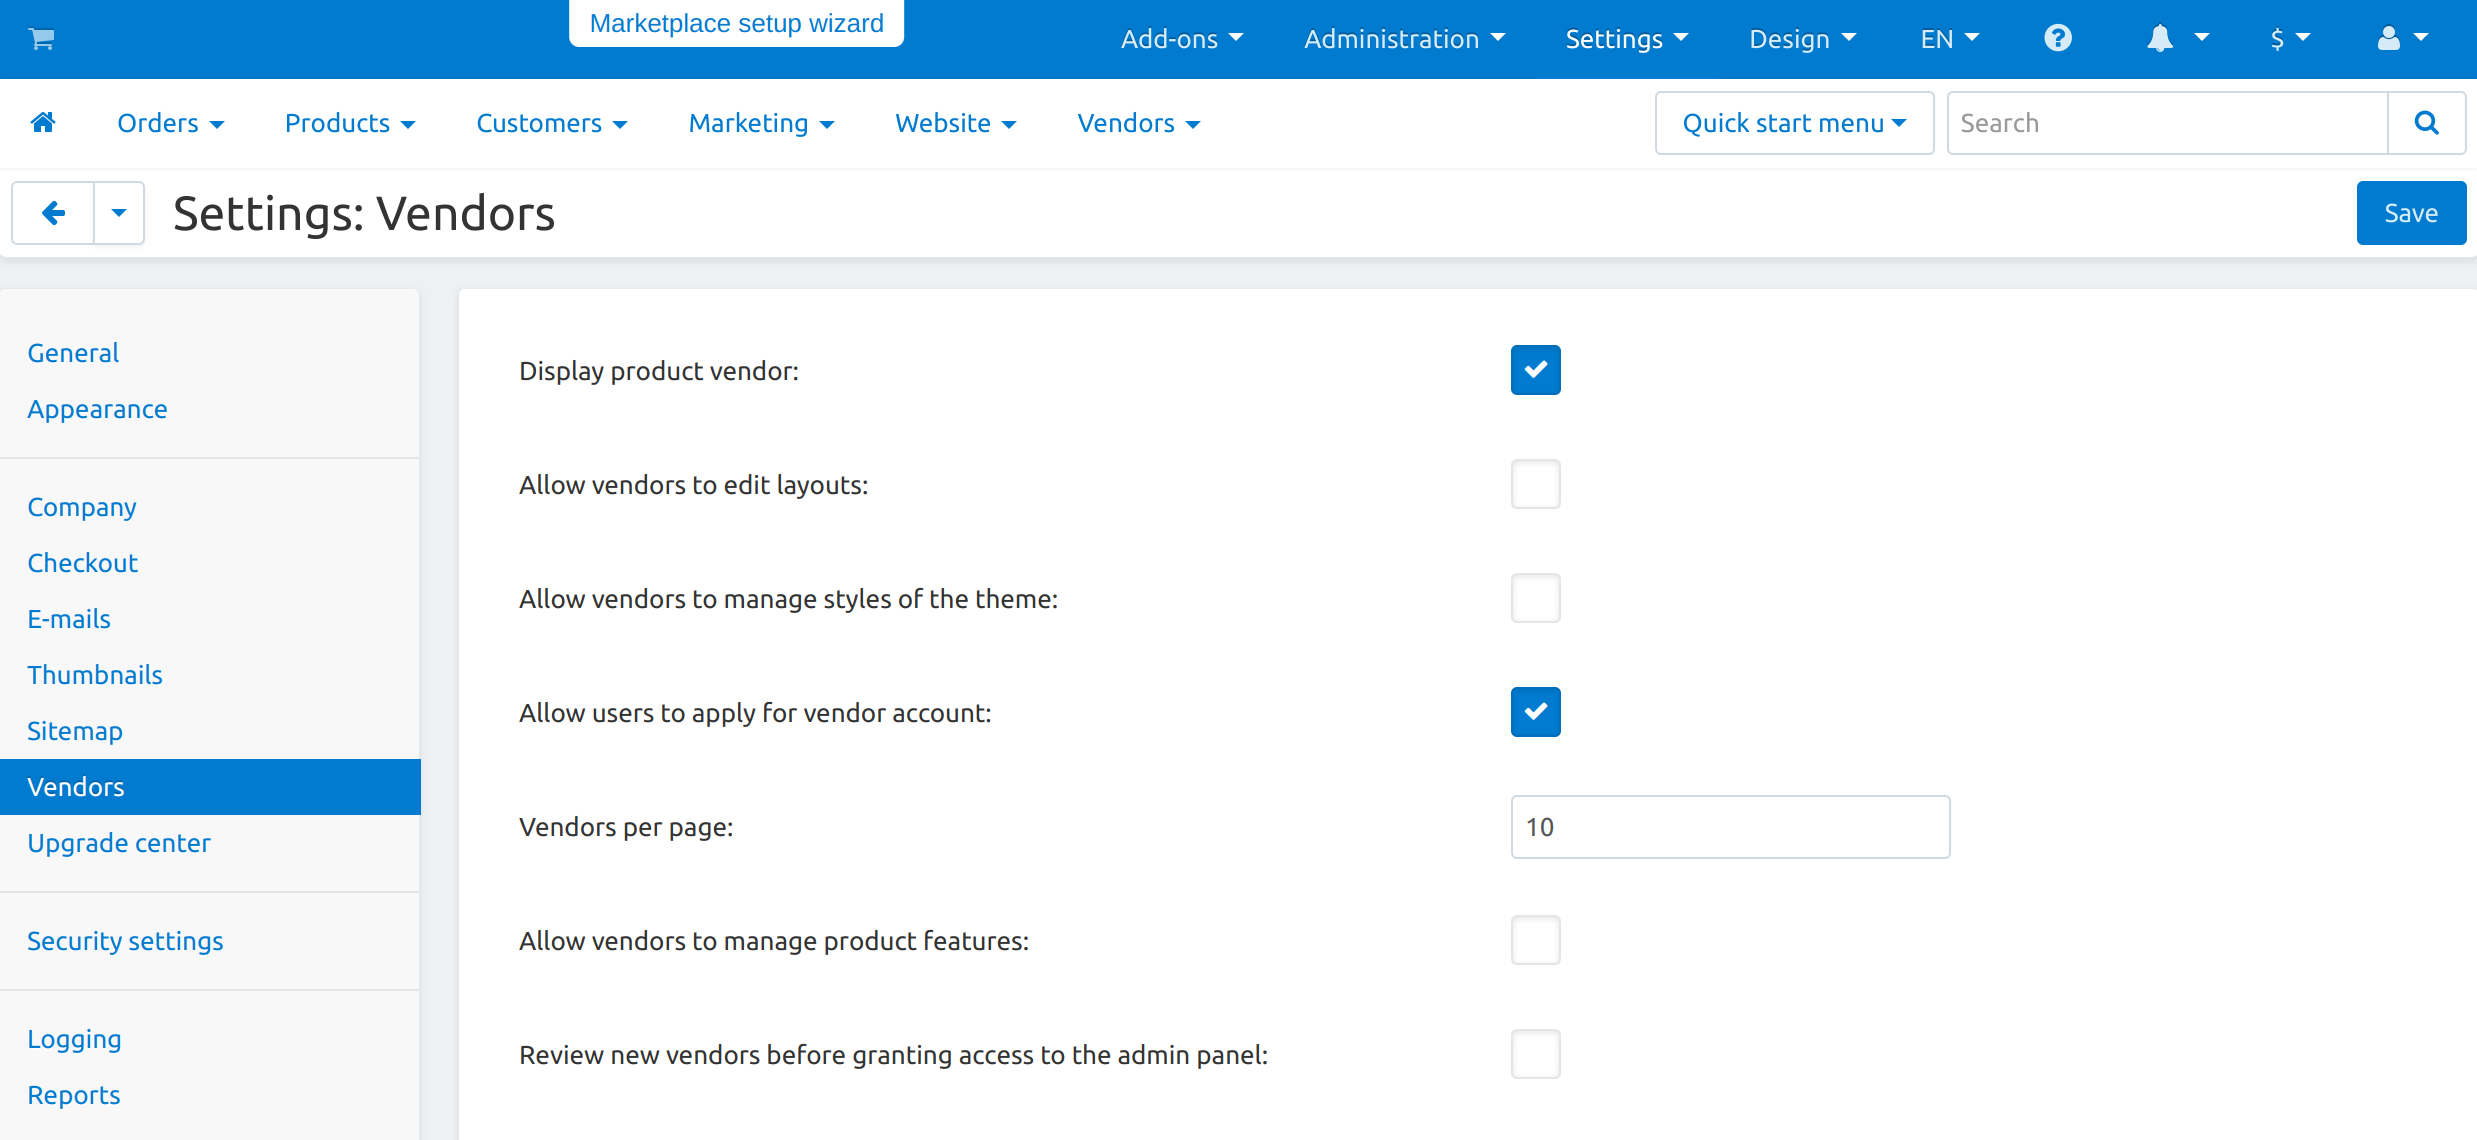 Allowing users to apply for vendor accounts.